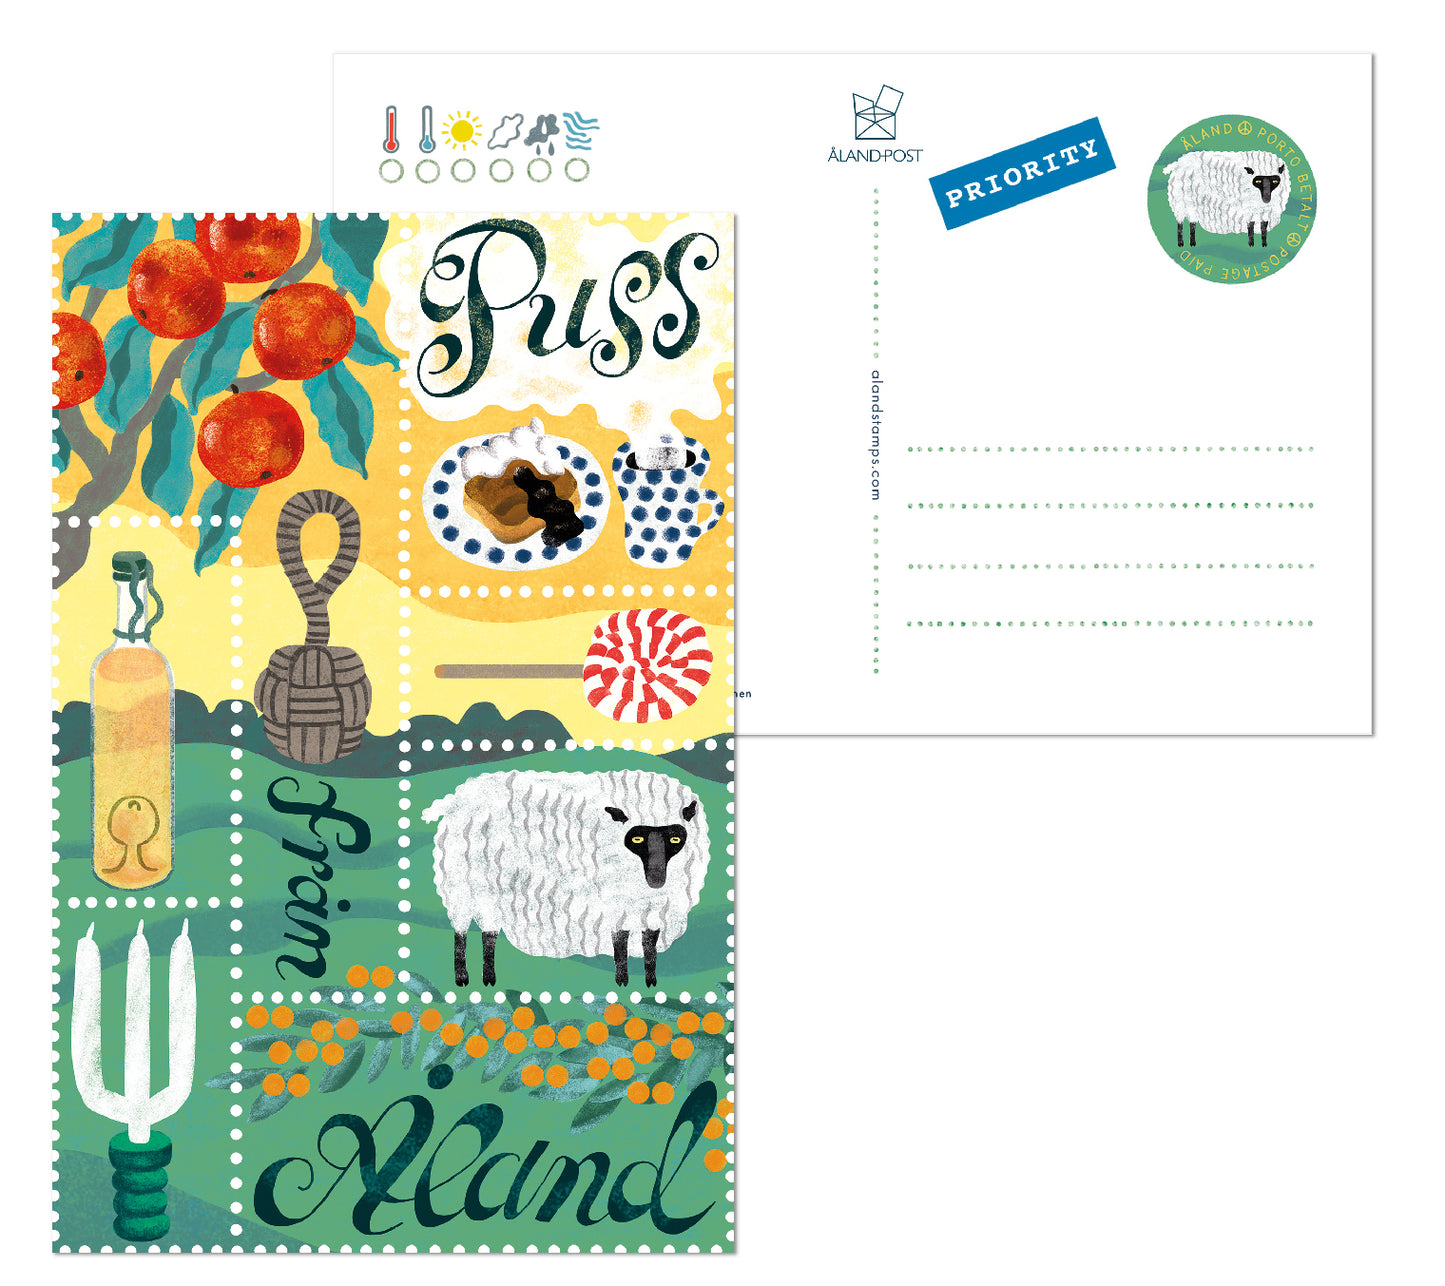 Greetings from Åland, 4 cards - mint